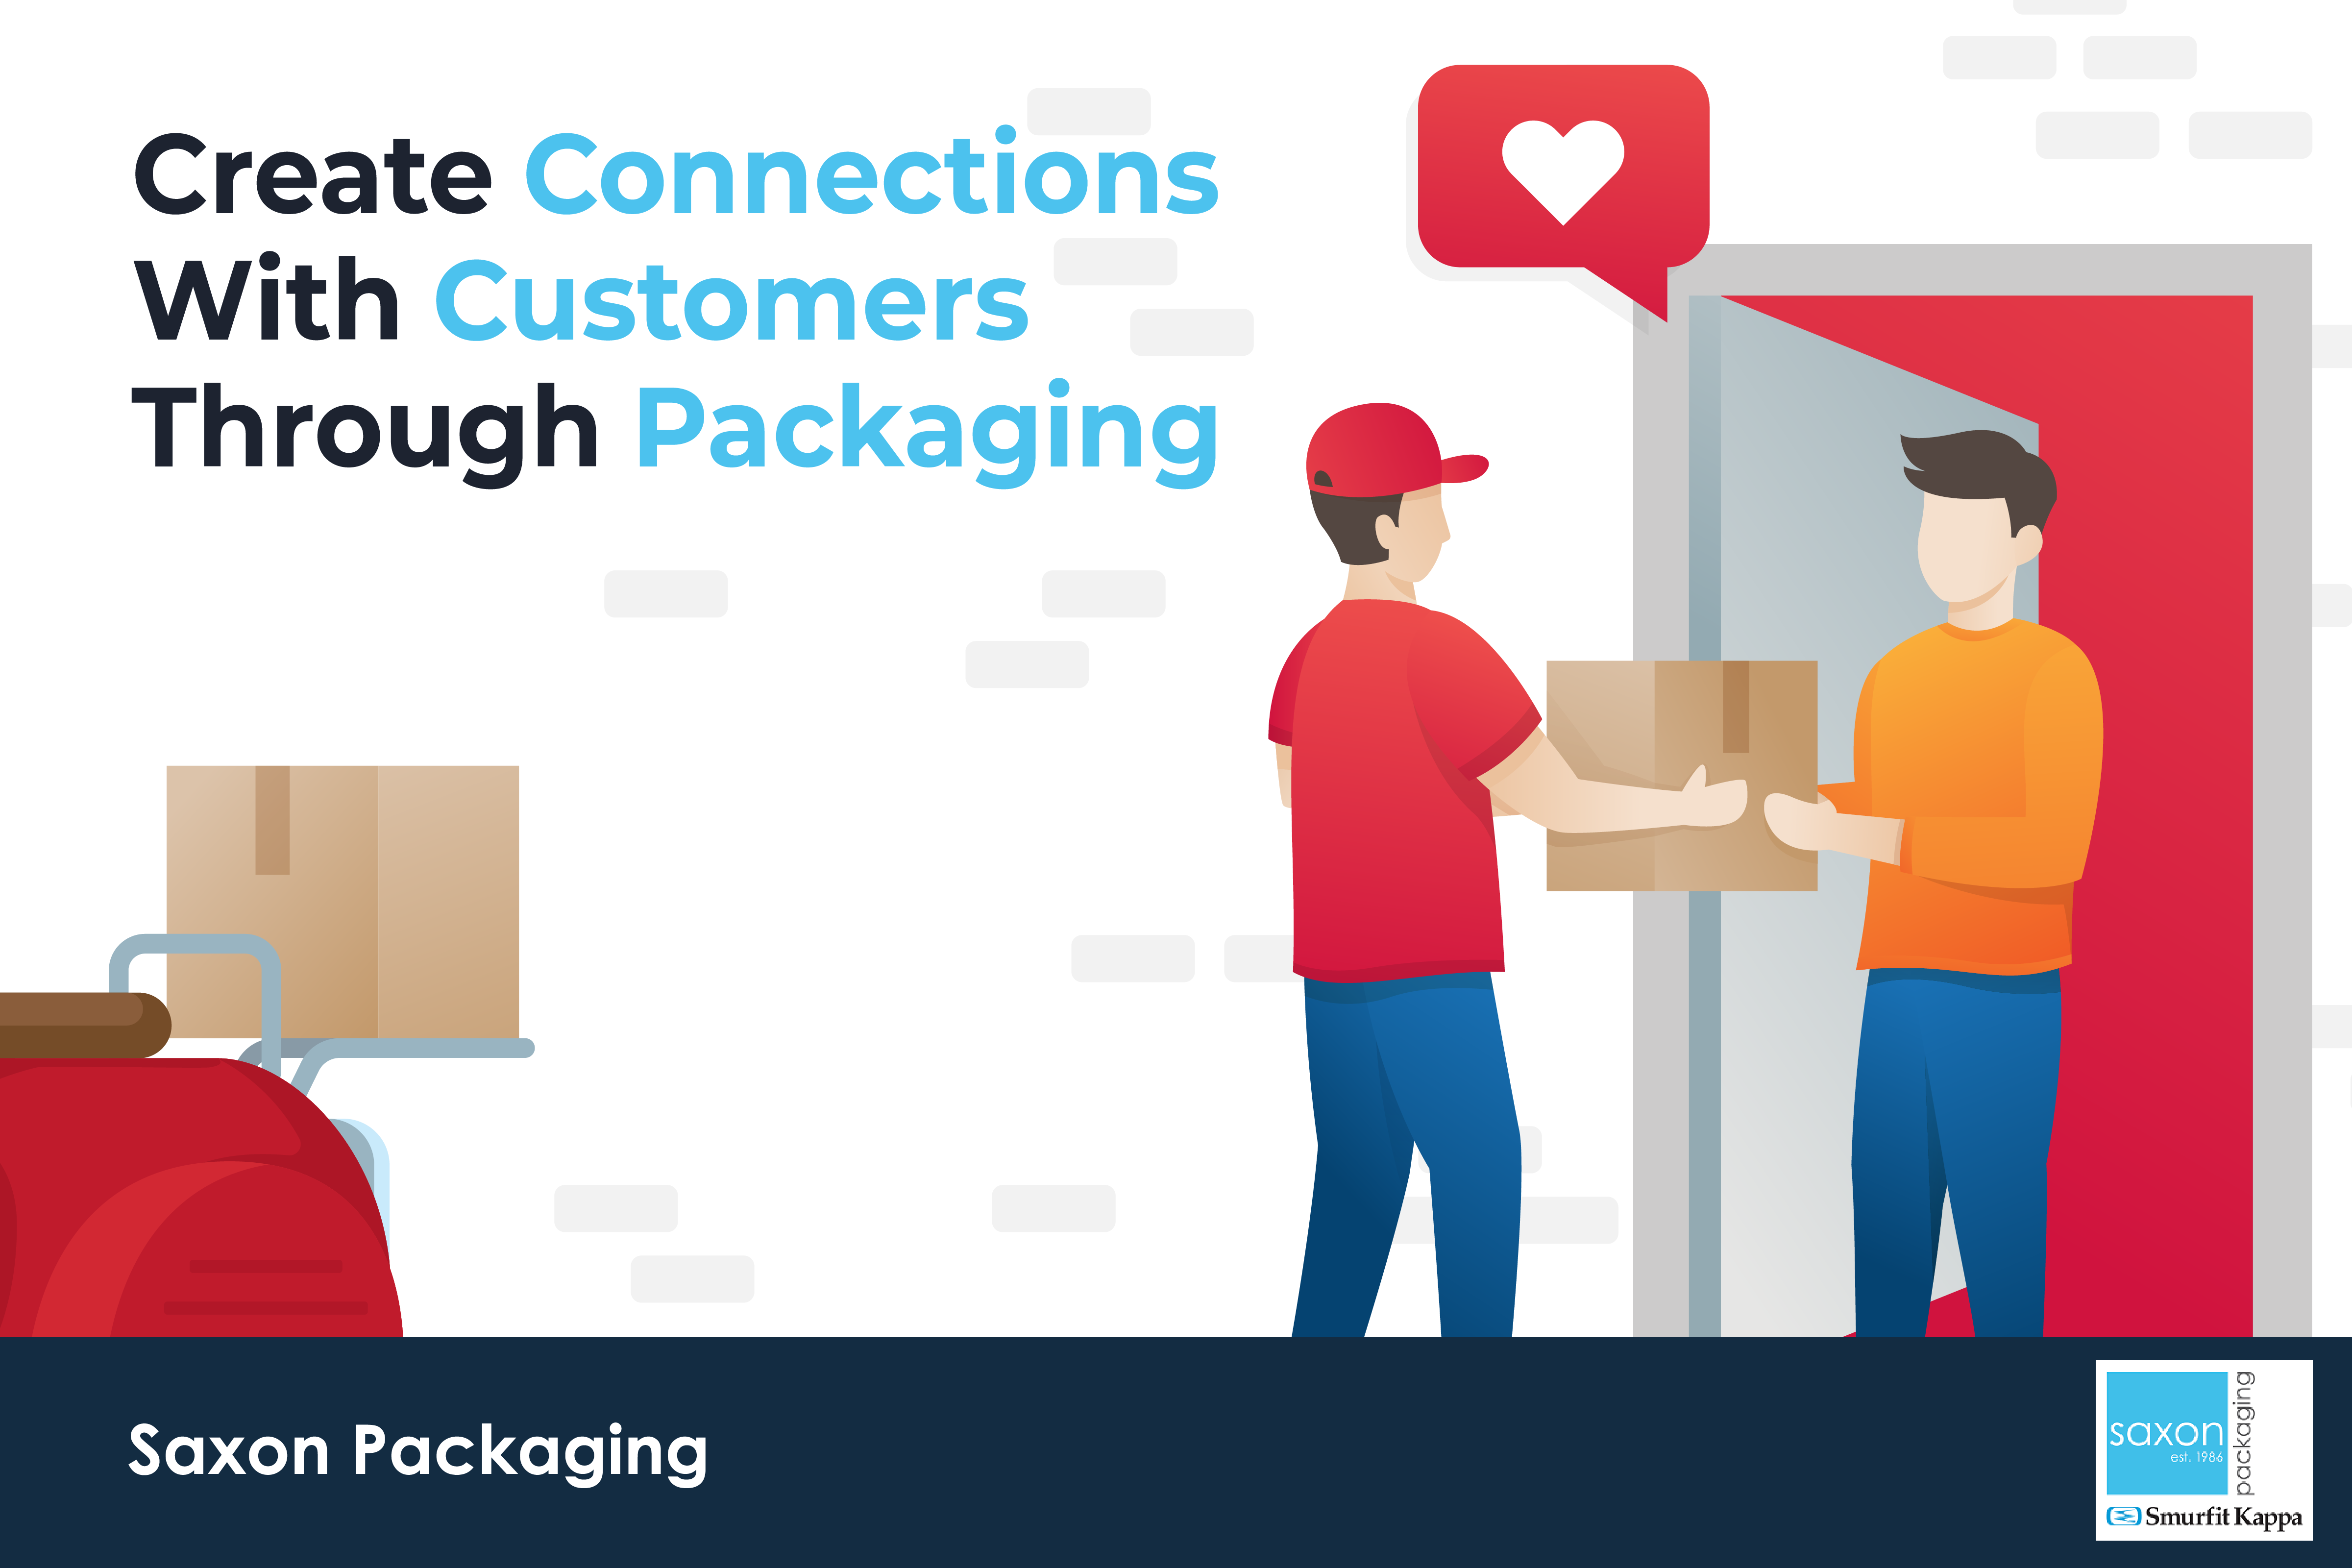 Create Connections With Customers Through Packaging